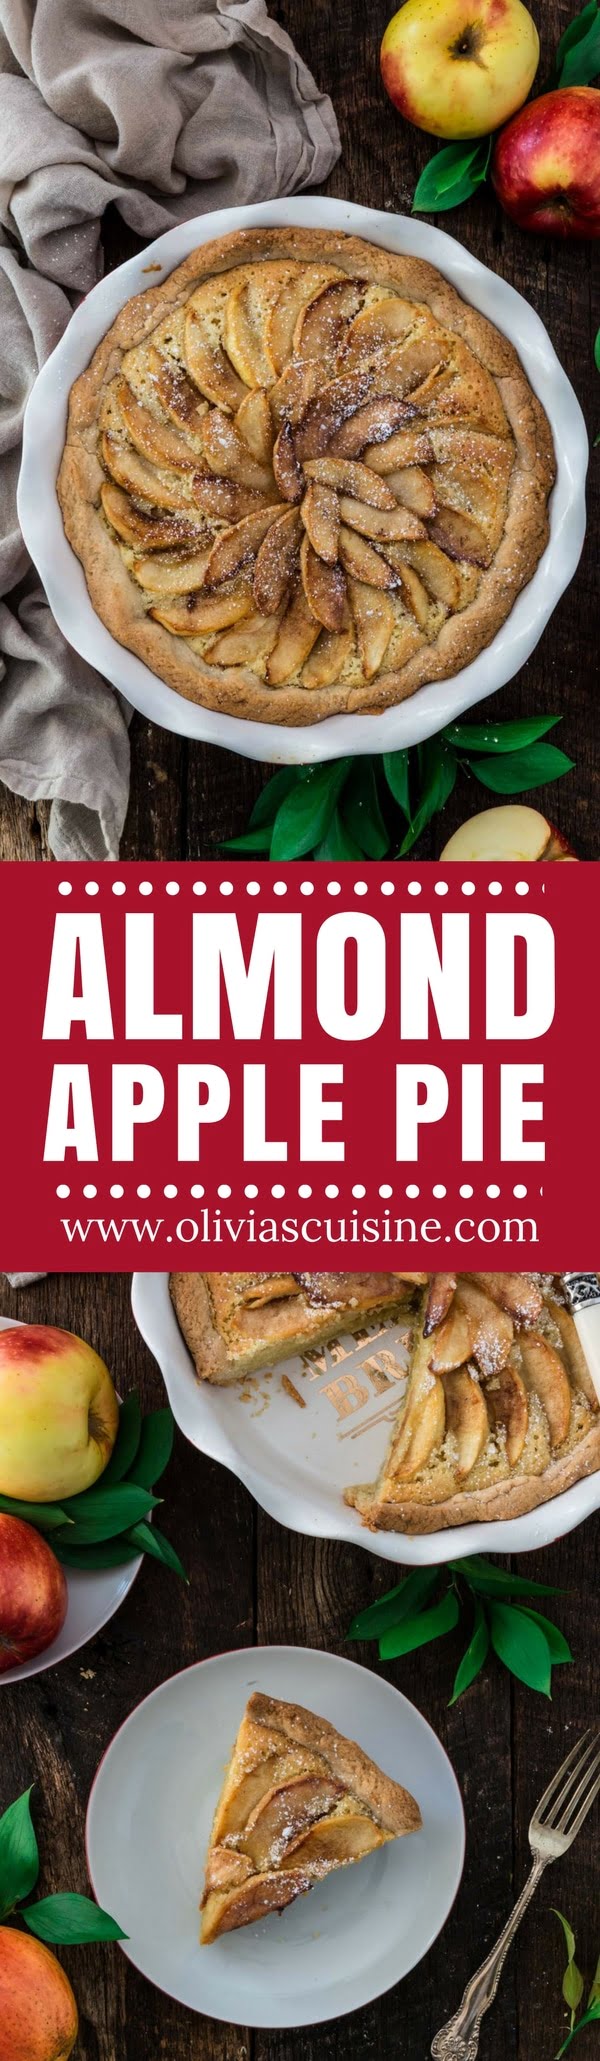 Almond Apple Pie | www.oliviascuisine.com | Inspired by the French Tarte Bourdaloue, this apple version consists of traditional almond cream topped with browned/caramelized apple slices. If you're tired of the old classic apple pie, give this a try. You won't regret it! (Recipe and food photography by @oliviascuisine.)